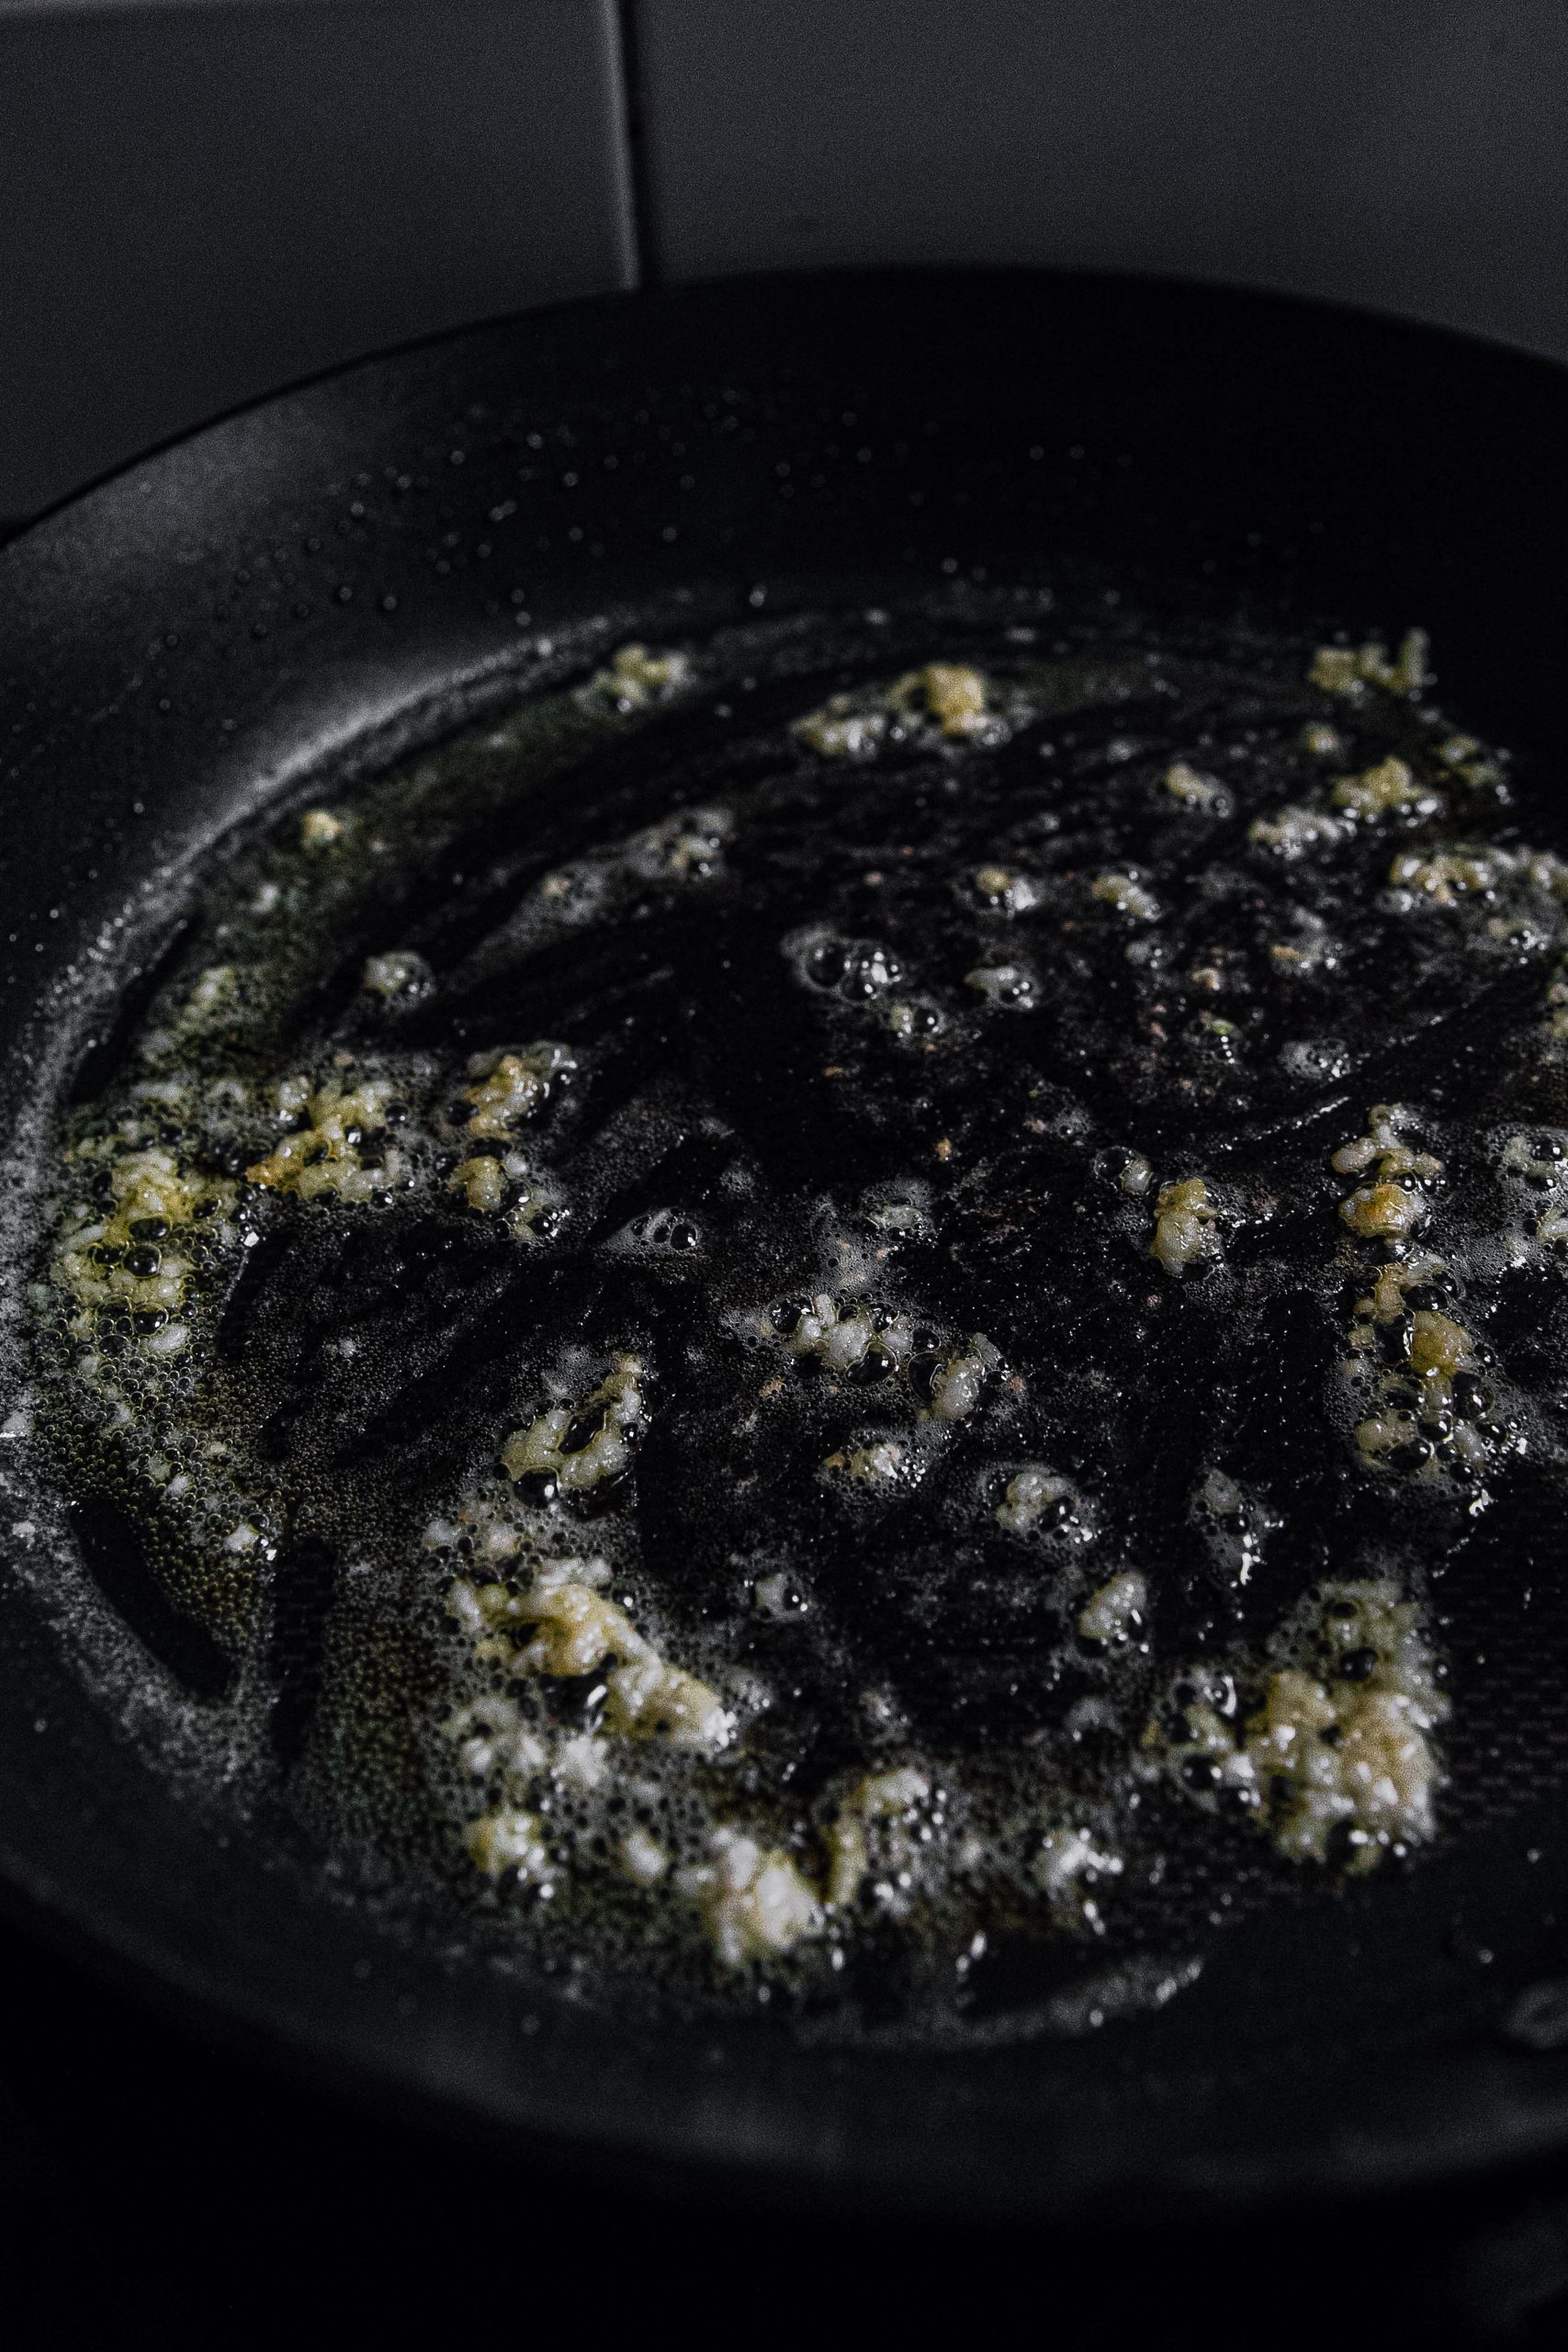  In a skillet over medium heat, add olive oil and butter. 